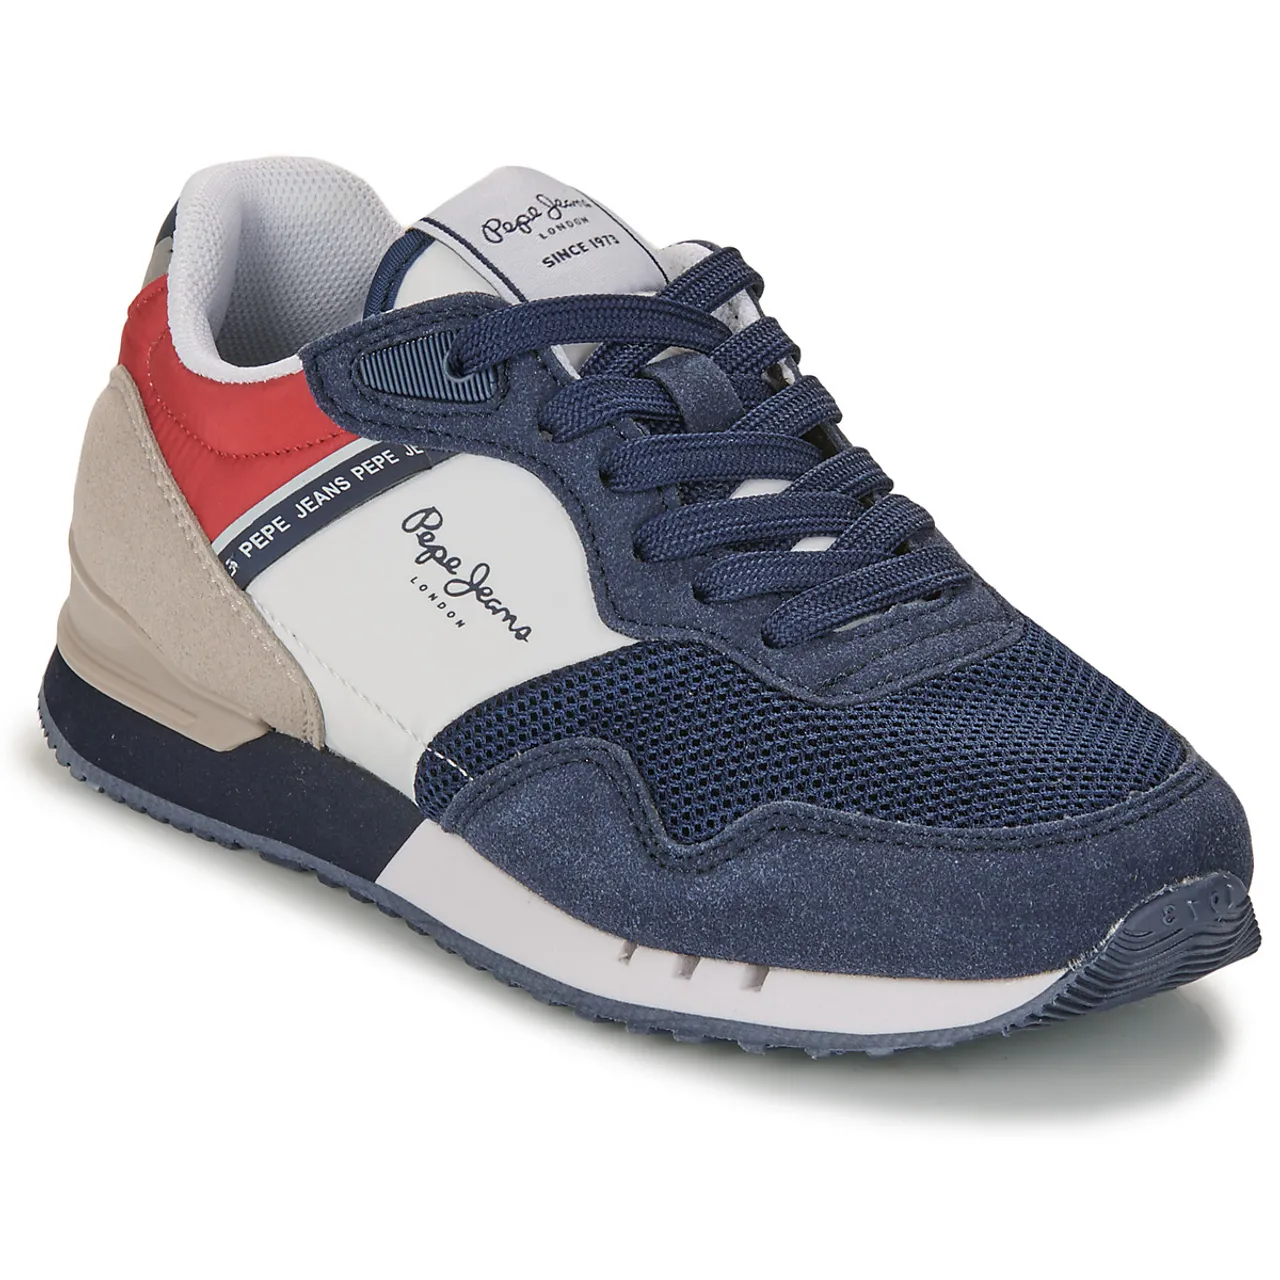 Pepe jeans  LONDON URBAN B  boys's Children's Shoes (Trainers) in Marine